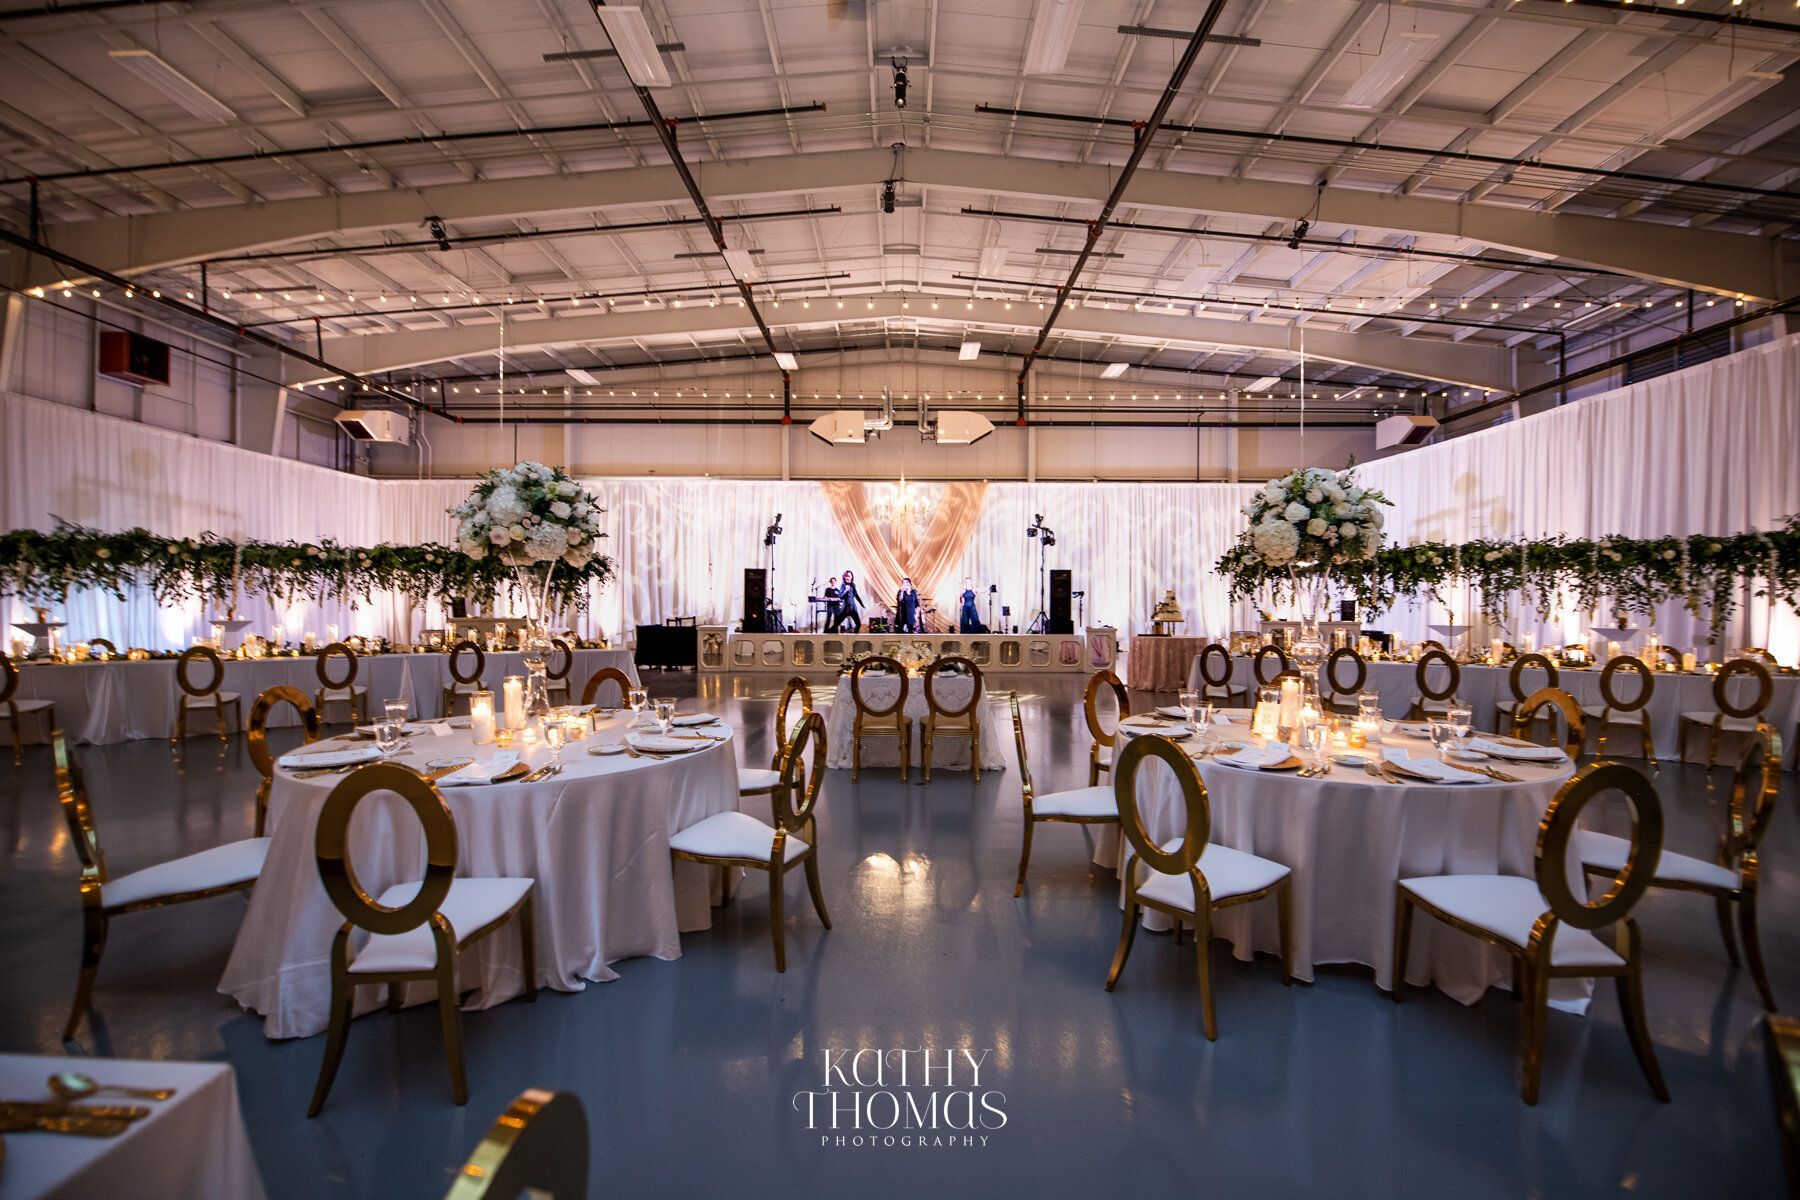 Large room with tables and chairs set up for a wedding reception by Wedding Planner Nashville